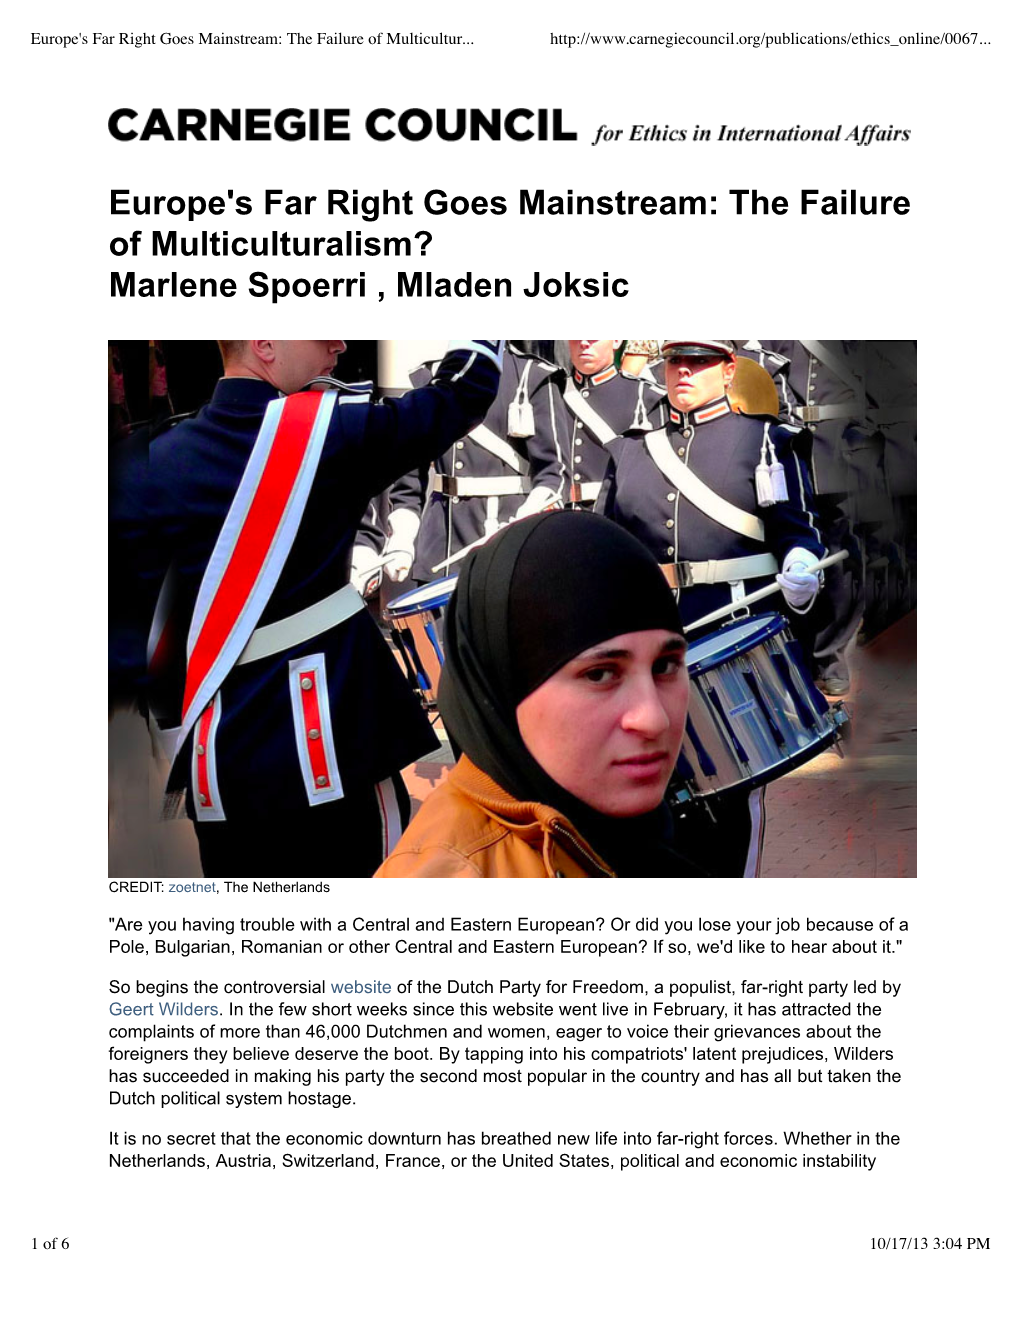 Europe's Far Right Goes Mainstream: the Failure of Multicultur